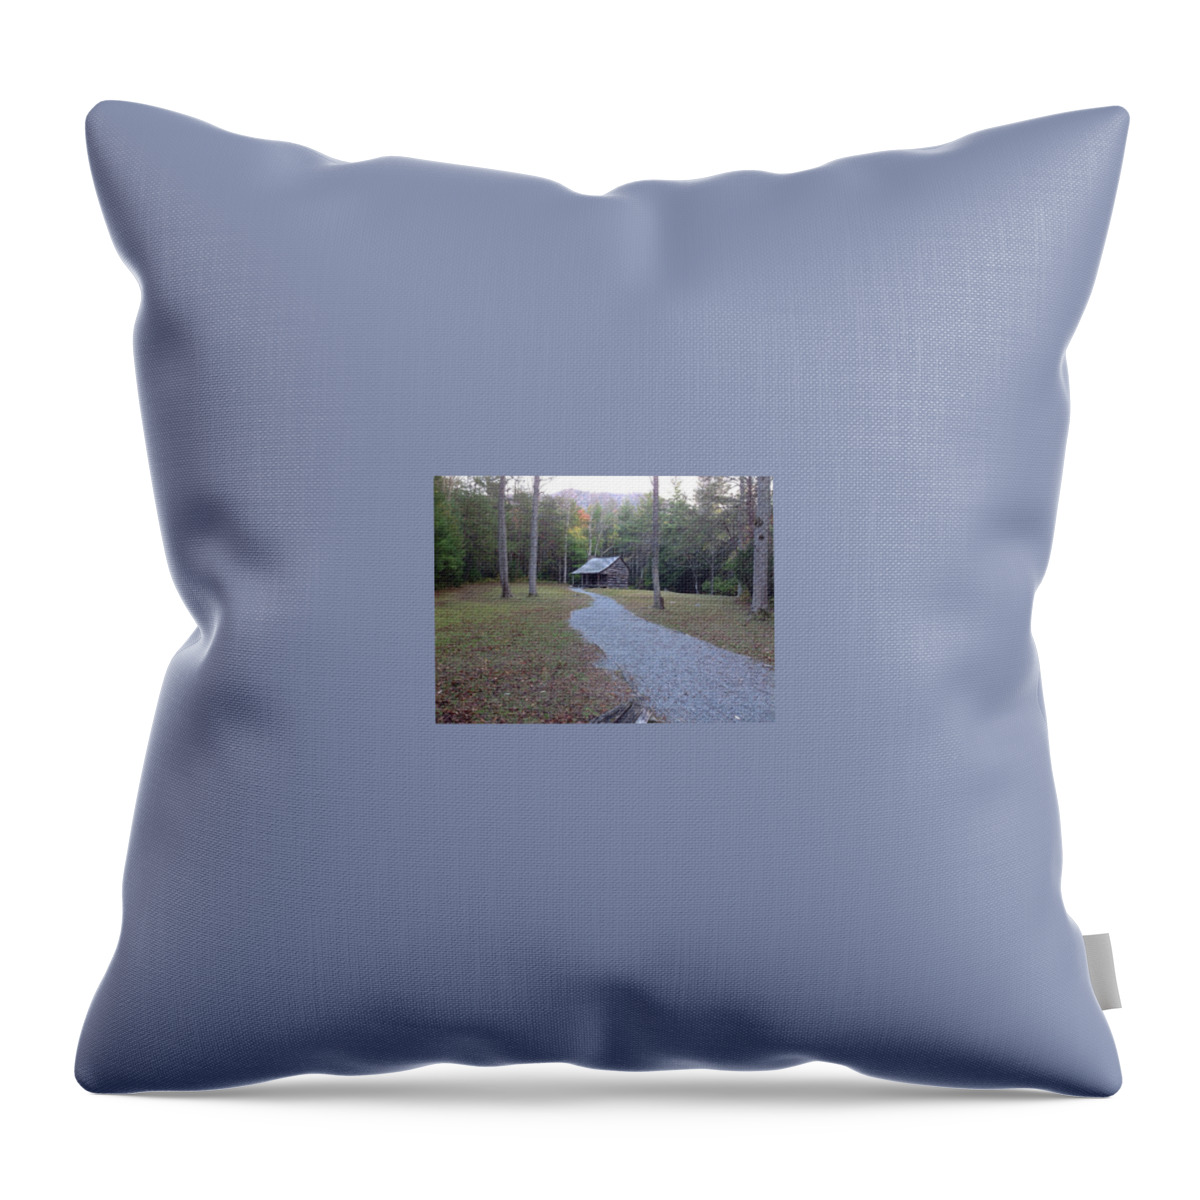 Smoky Mountains Throw Pillow featuring the photograph Smokies 3 by Val Oconnor